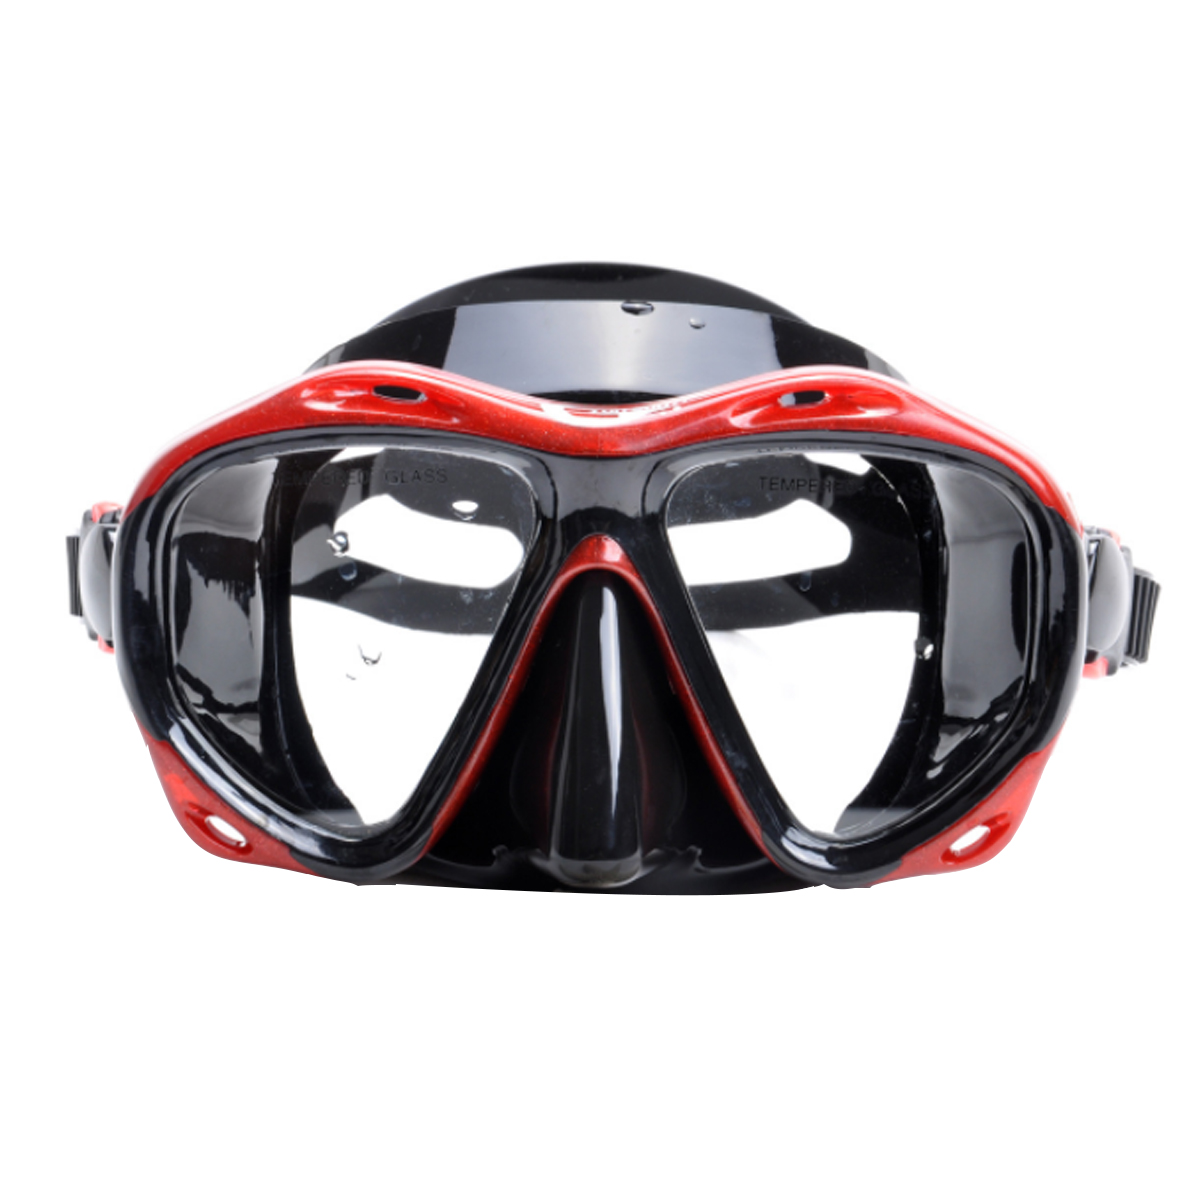 Tempered glass silicone scuba underwater diving mask 